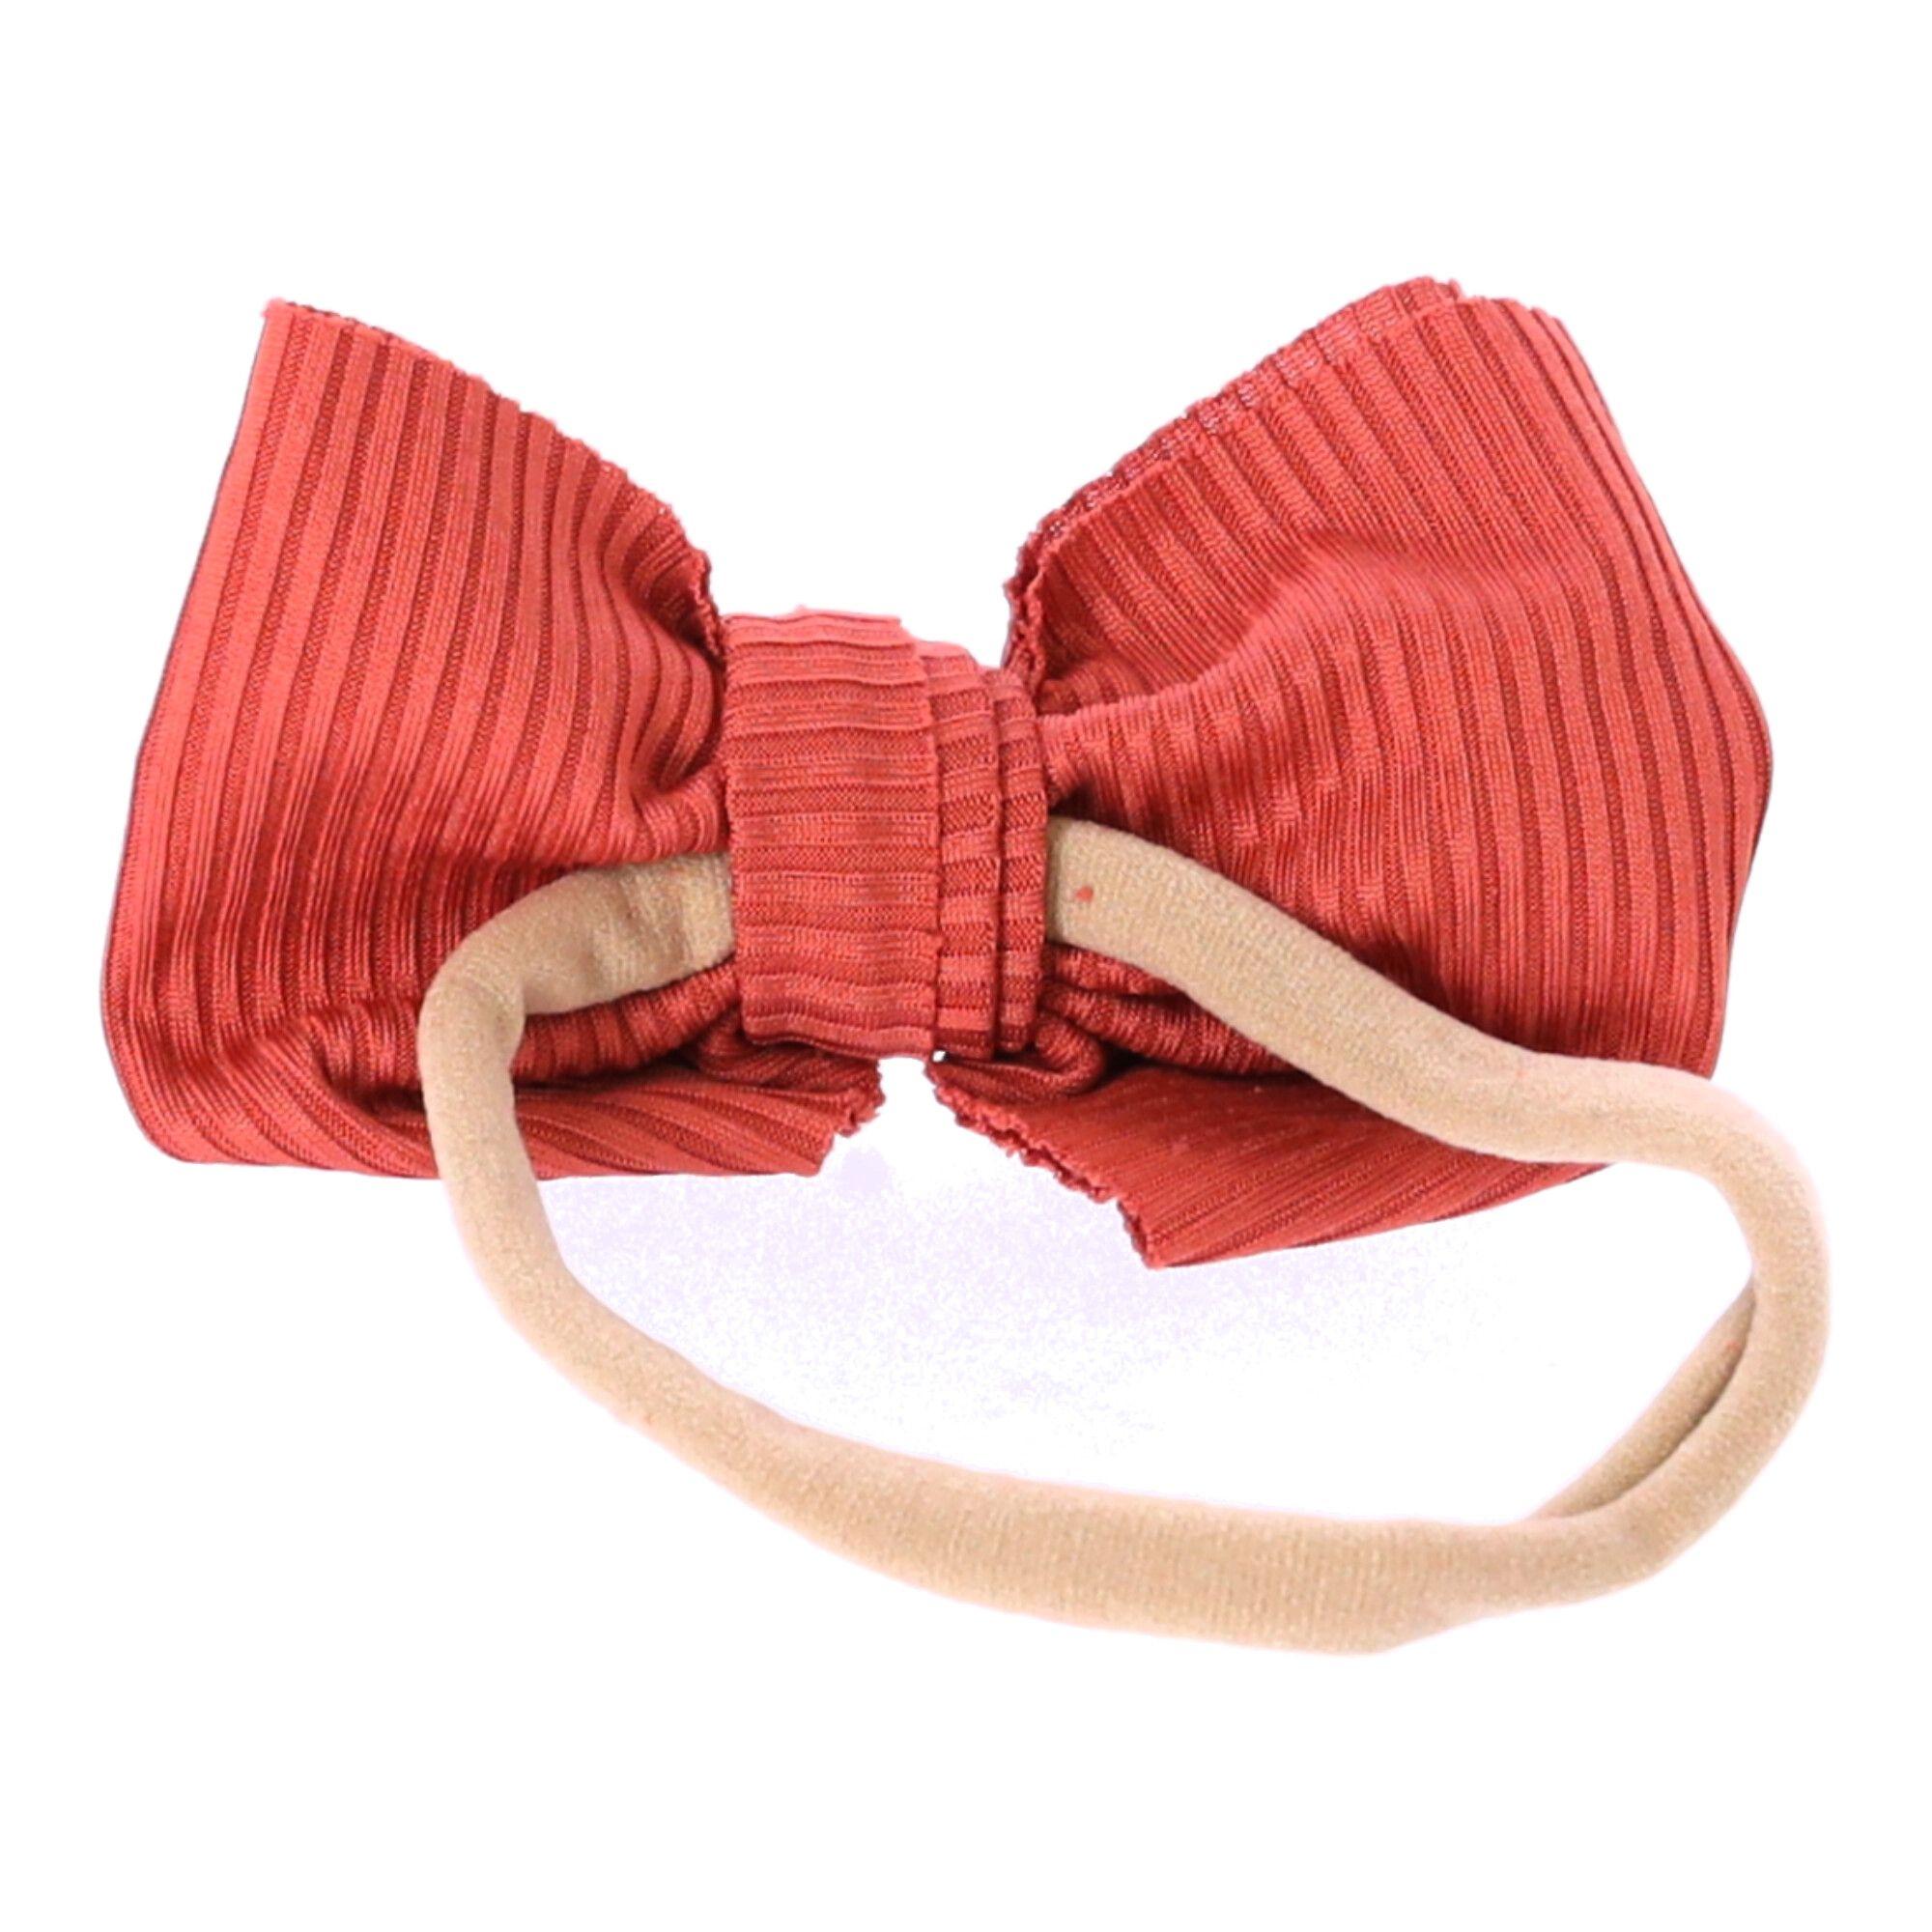 Baby headband with a bow - red wine